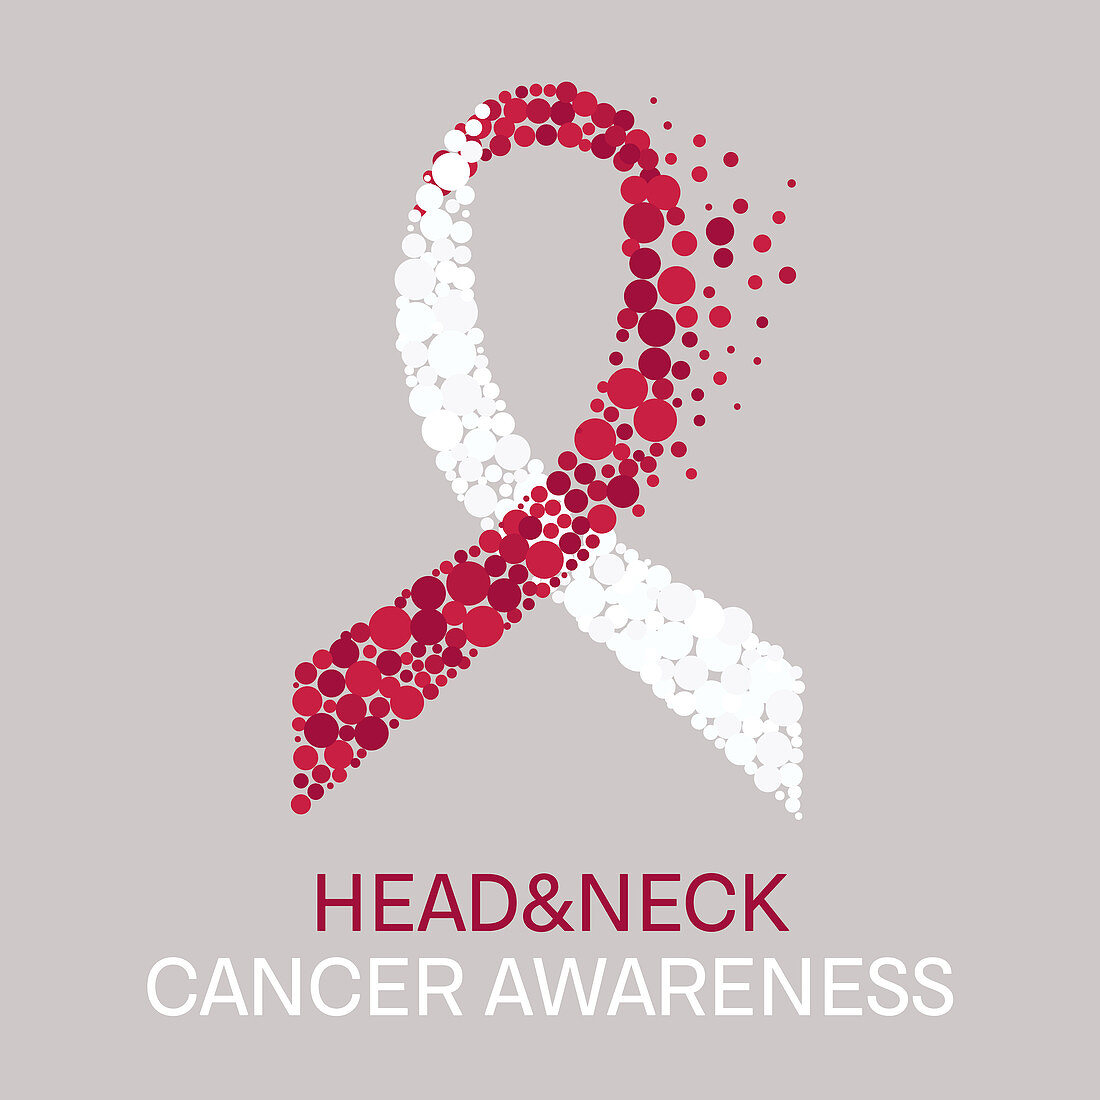 Head and neck cancer, conceptual illustration